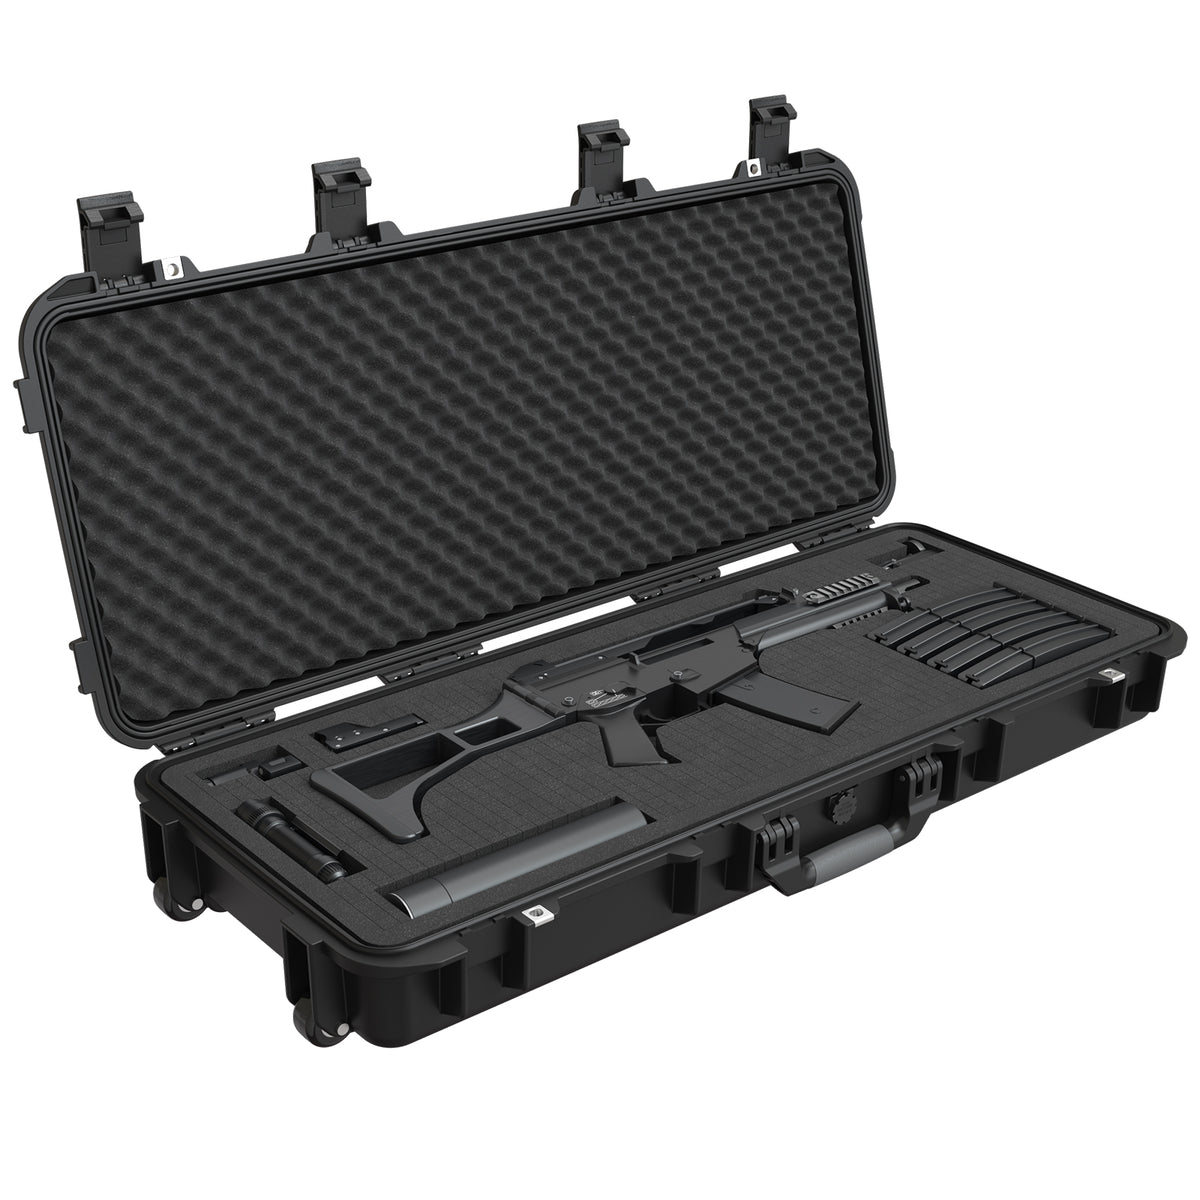 RPNB PP-11140 Weatherproof Hard Rifle Case with Customizable Foam Insert Open with Rifle &amp; Accessories